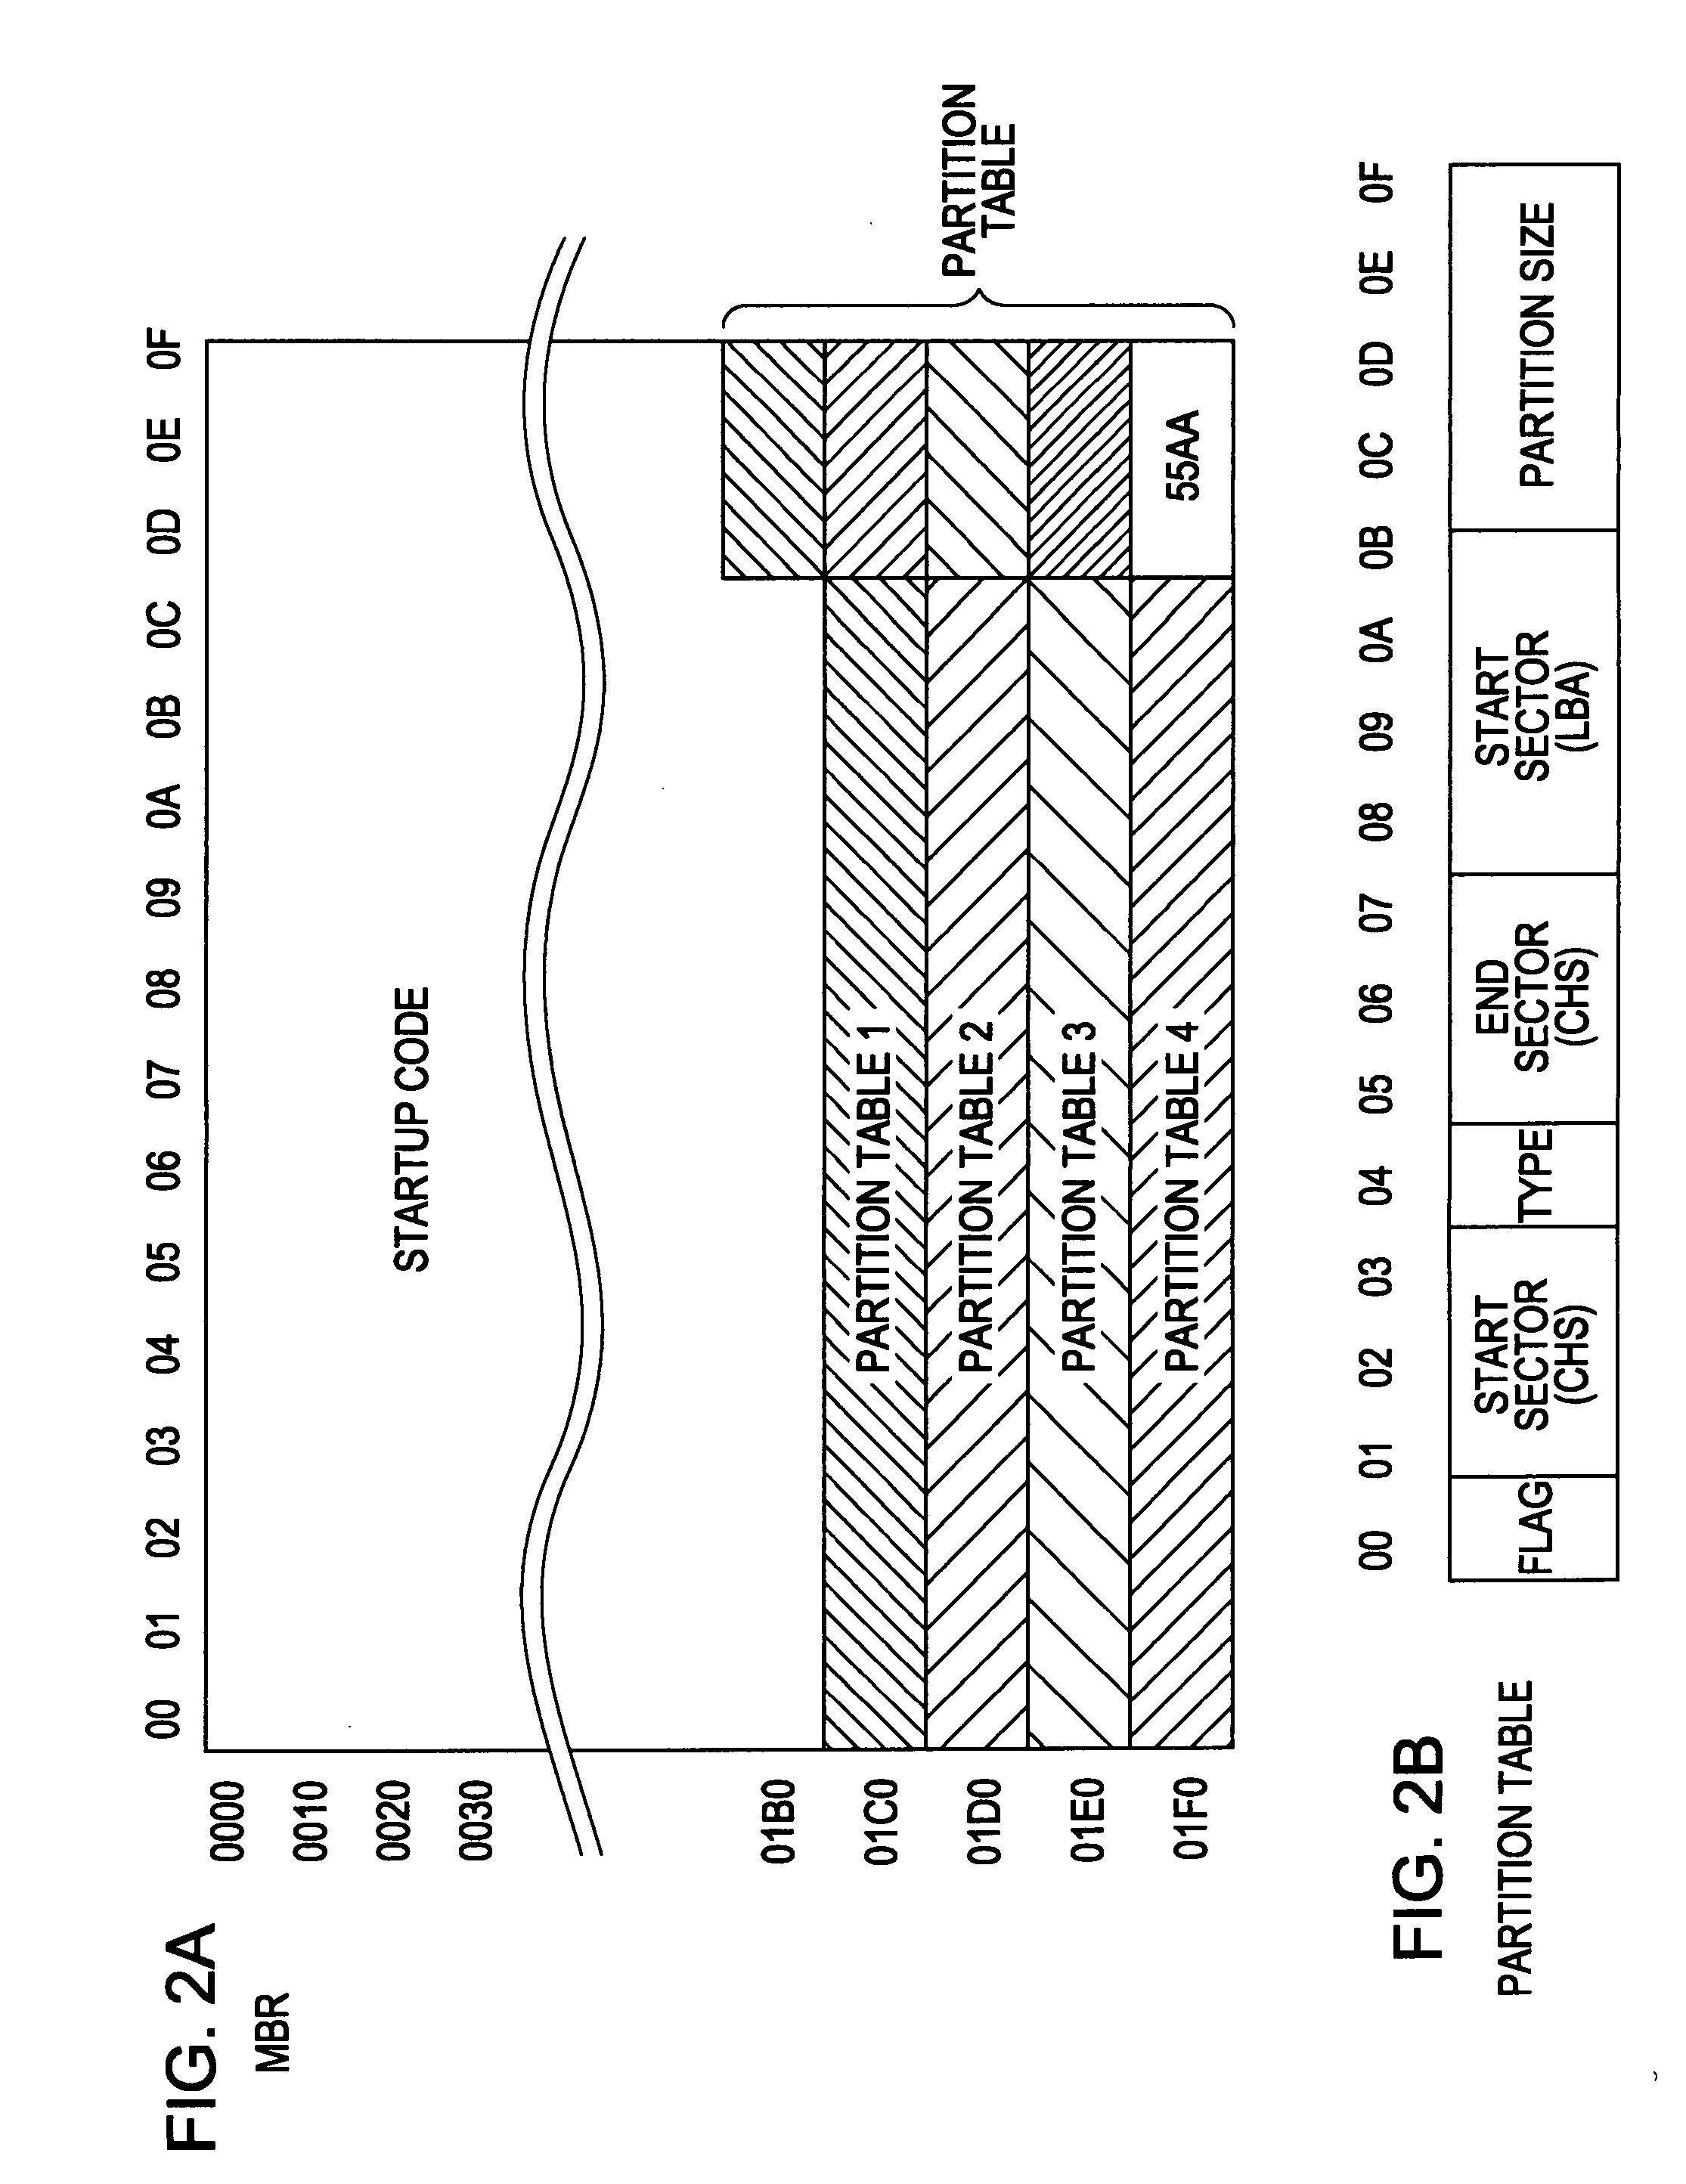 Apparatus, method, and computer program for processing information